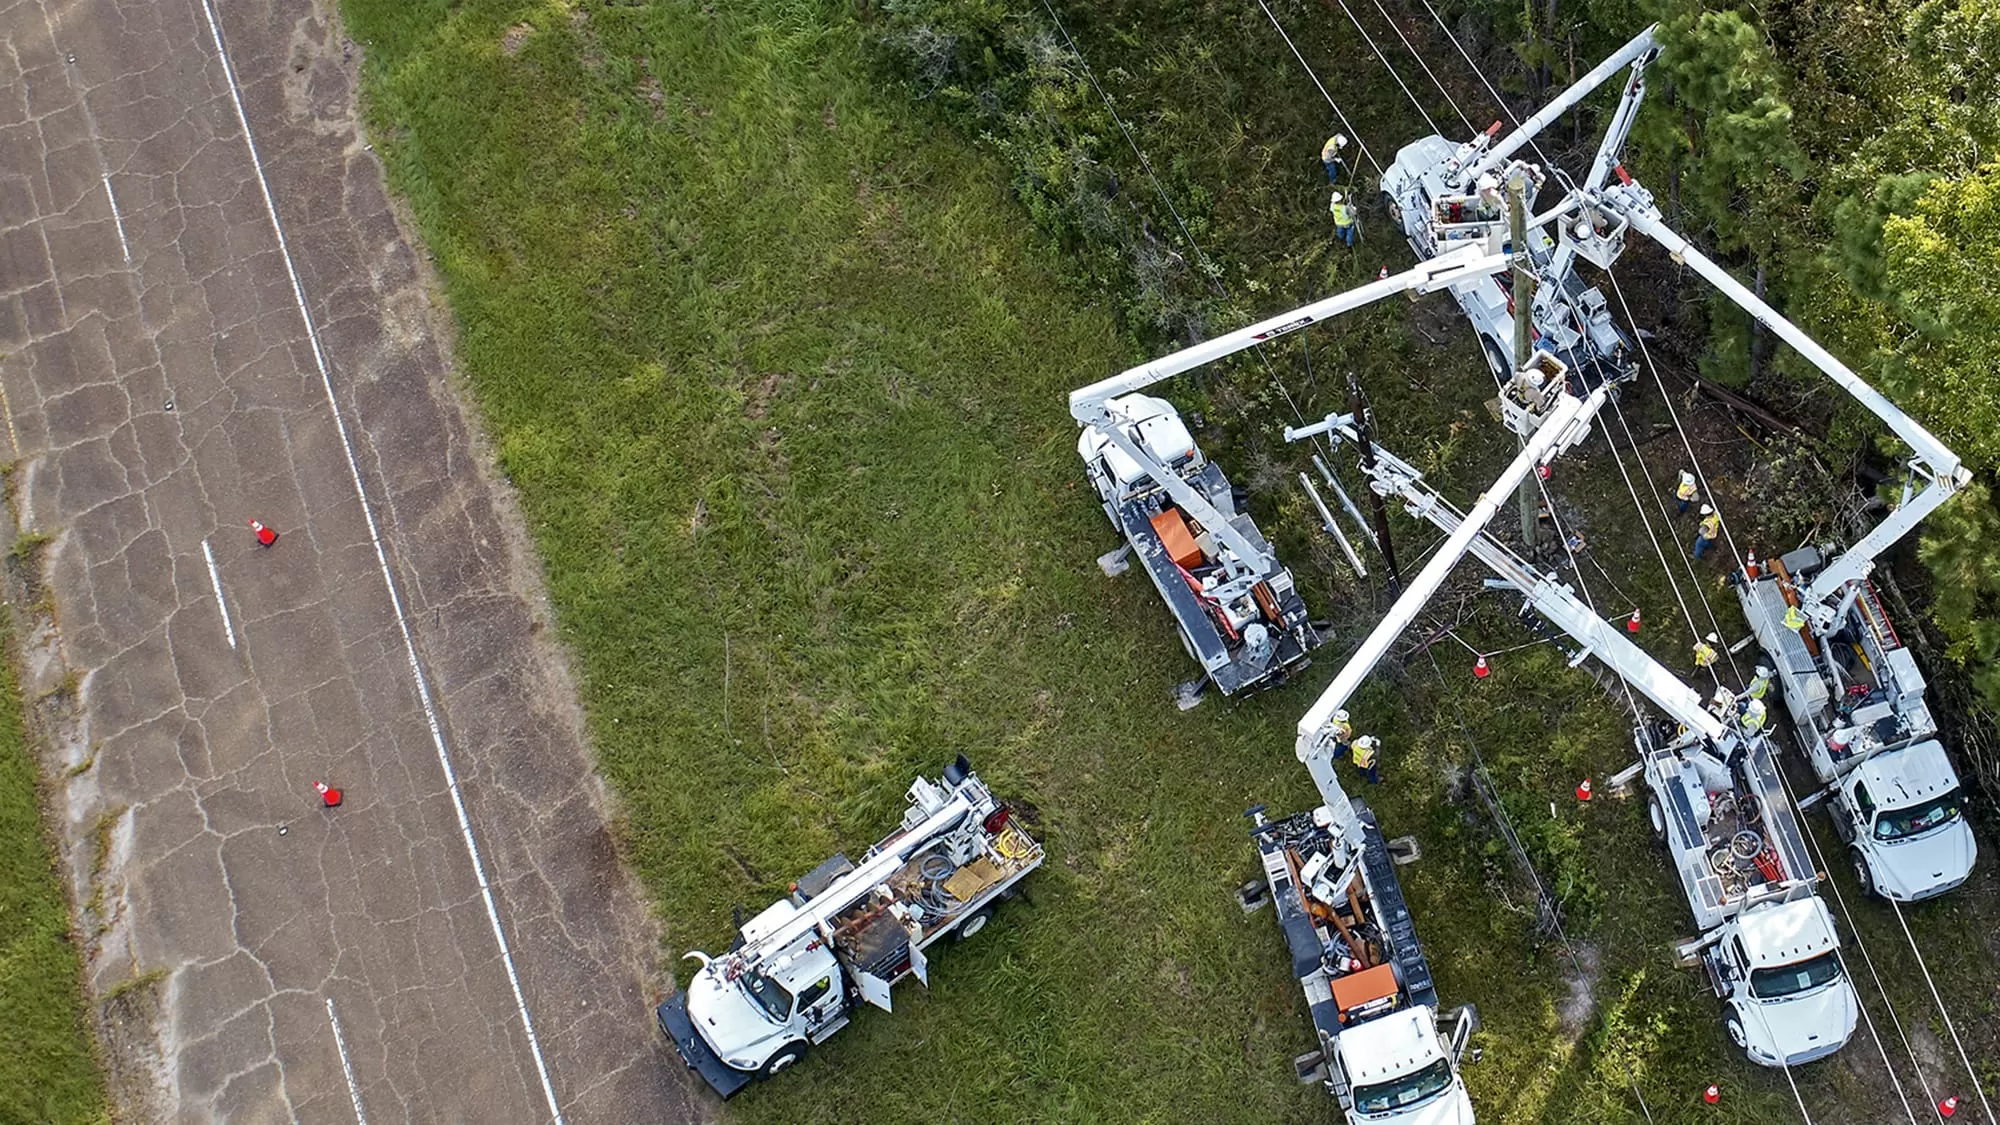 Overview of workers in cranes fixing electric poles and wires